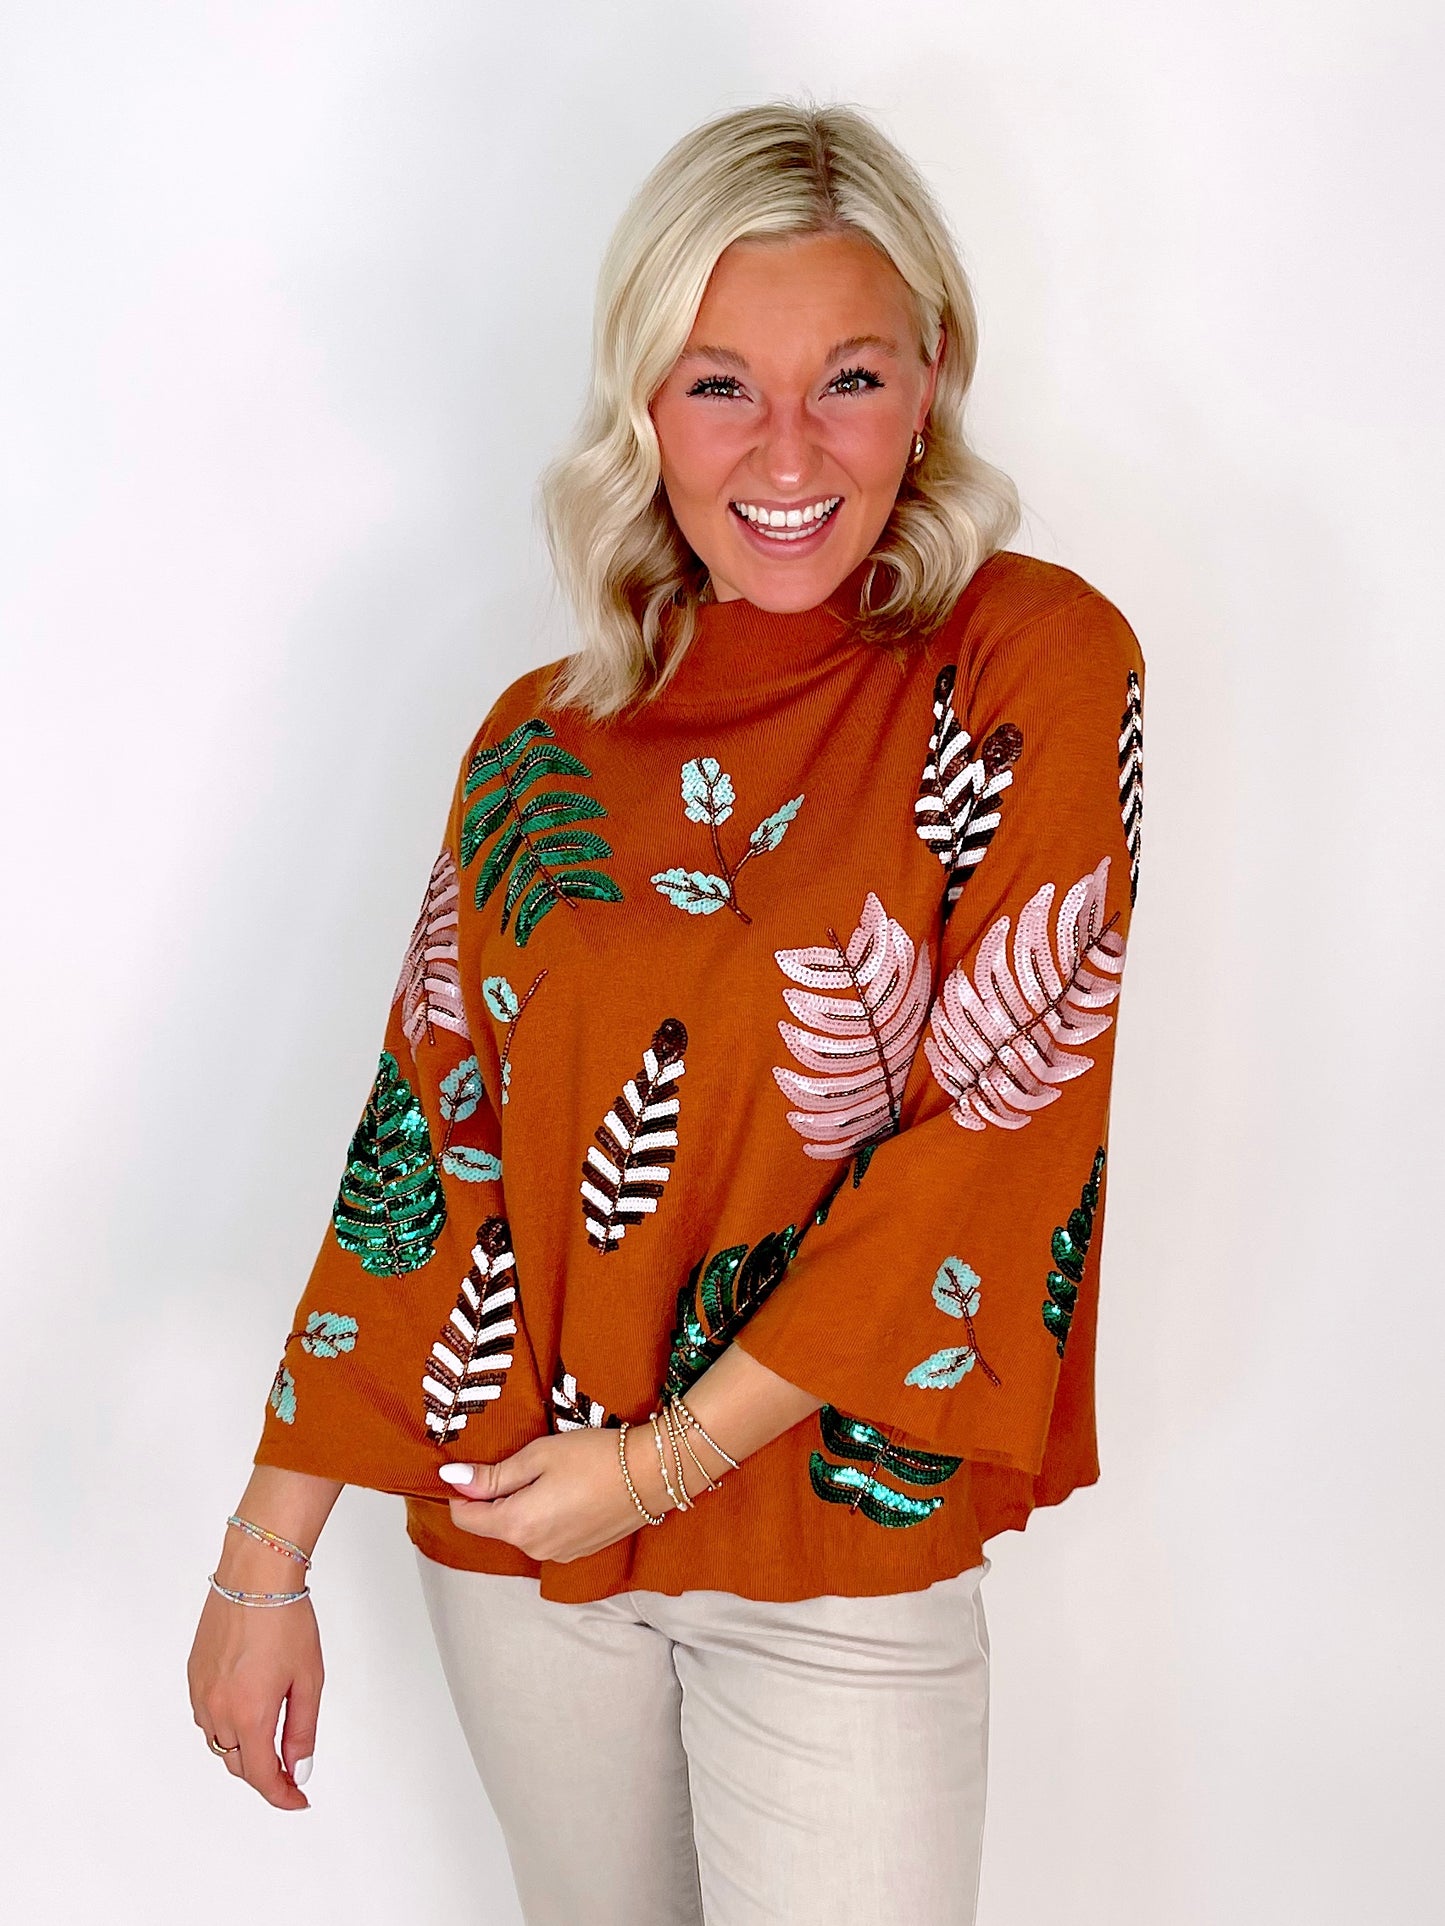 Falling For You Sweater-Sweaters-Fate-The Village Shoppe, Women’s Fashion Boutique, Shop Online and In Store - Located in Muscle Shoals, AL.